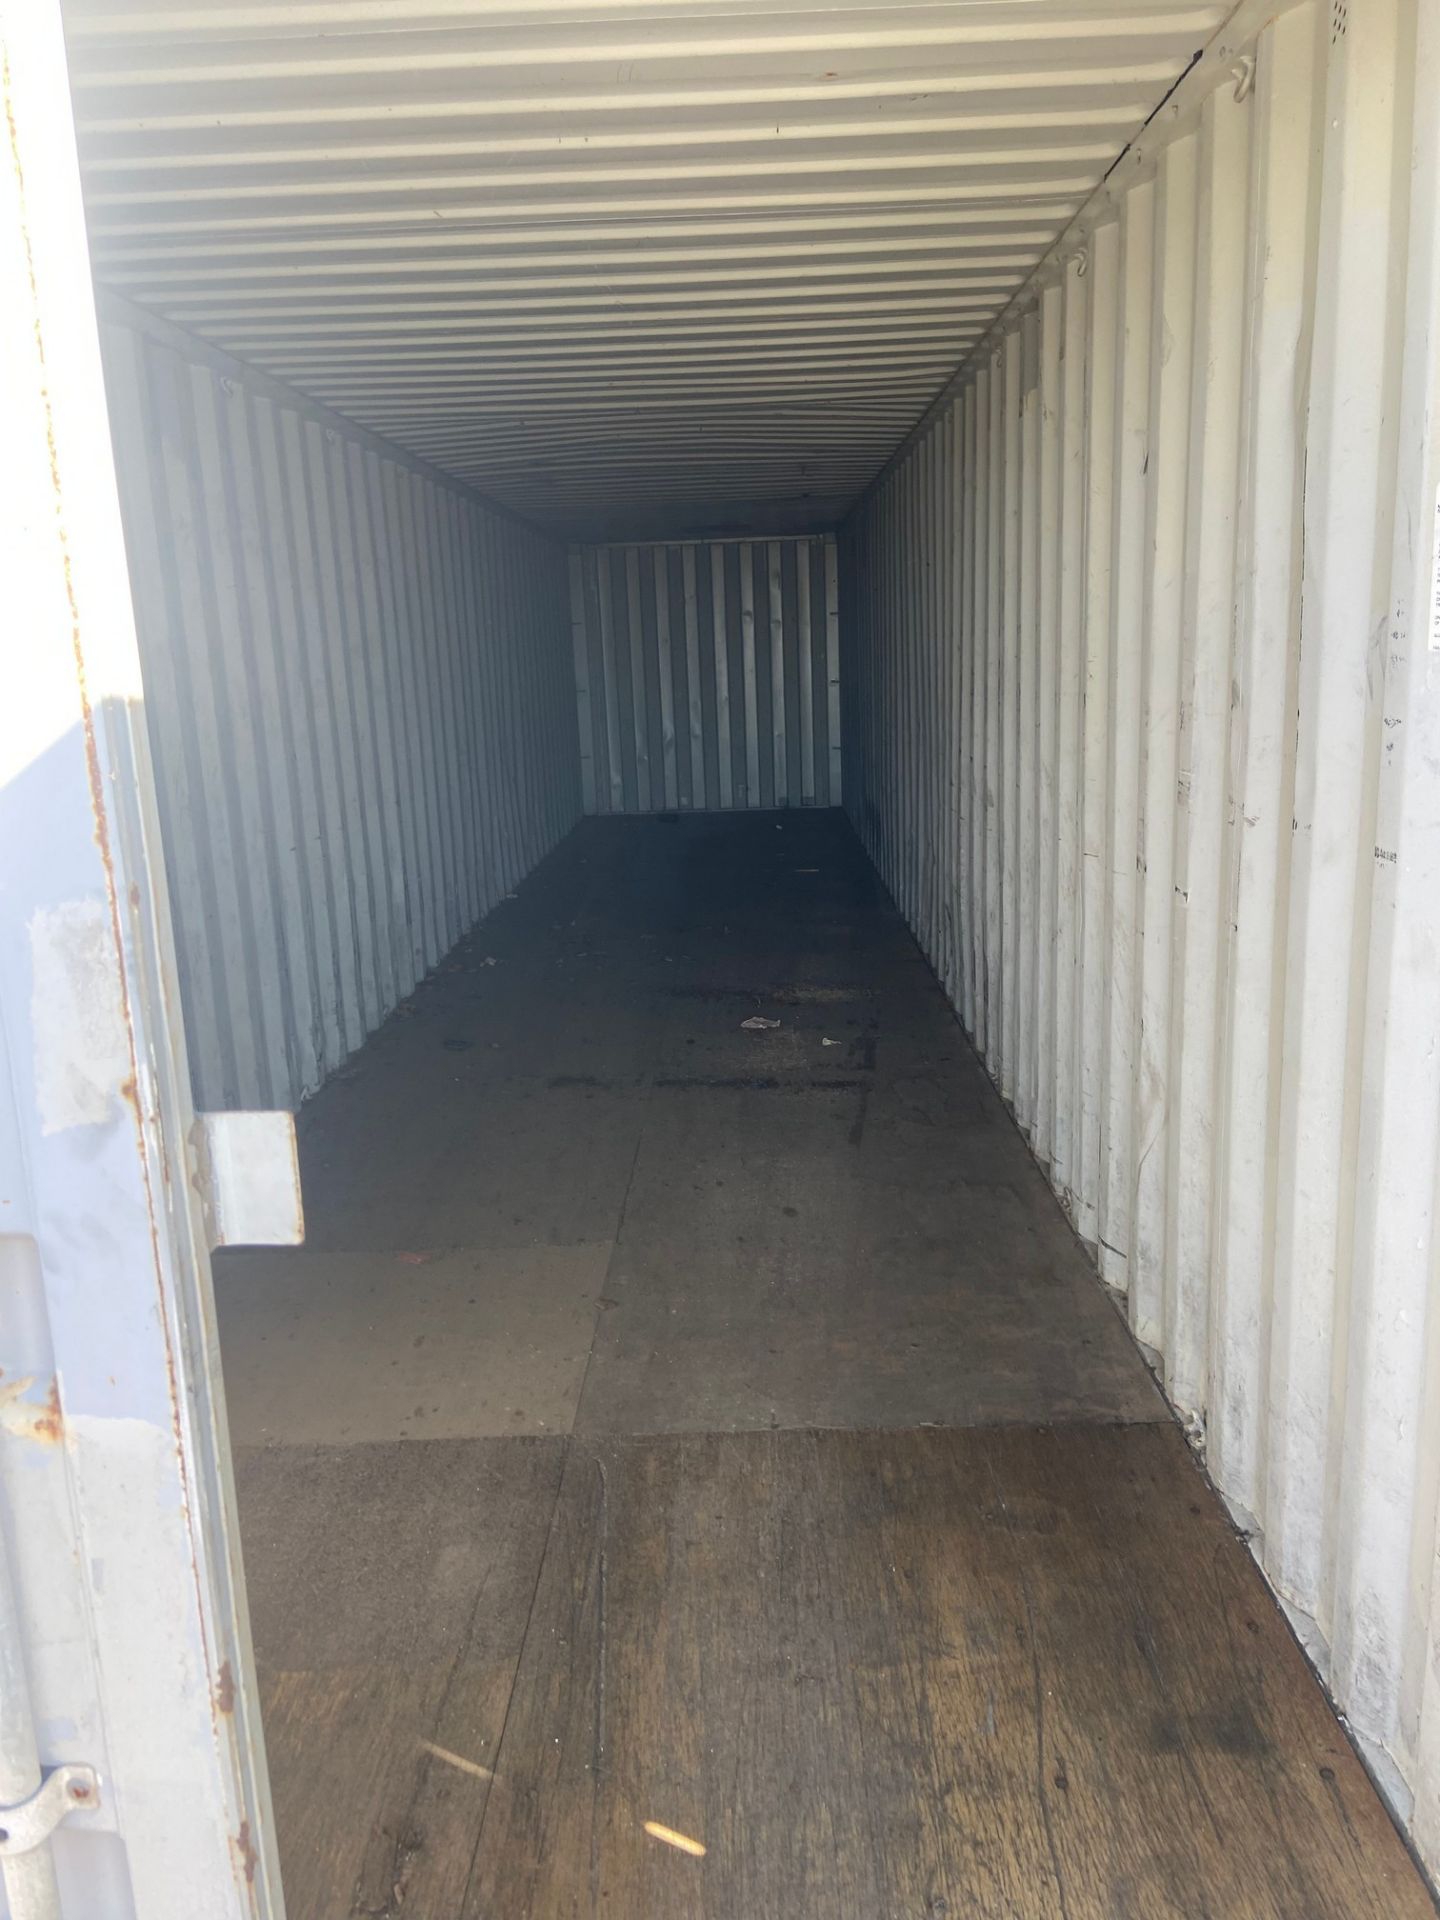 40' LONG SHIPPING CONTAINER - Image 3 of 4